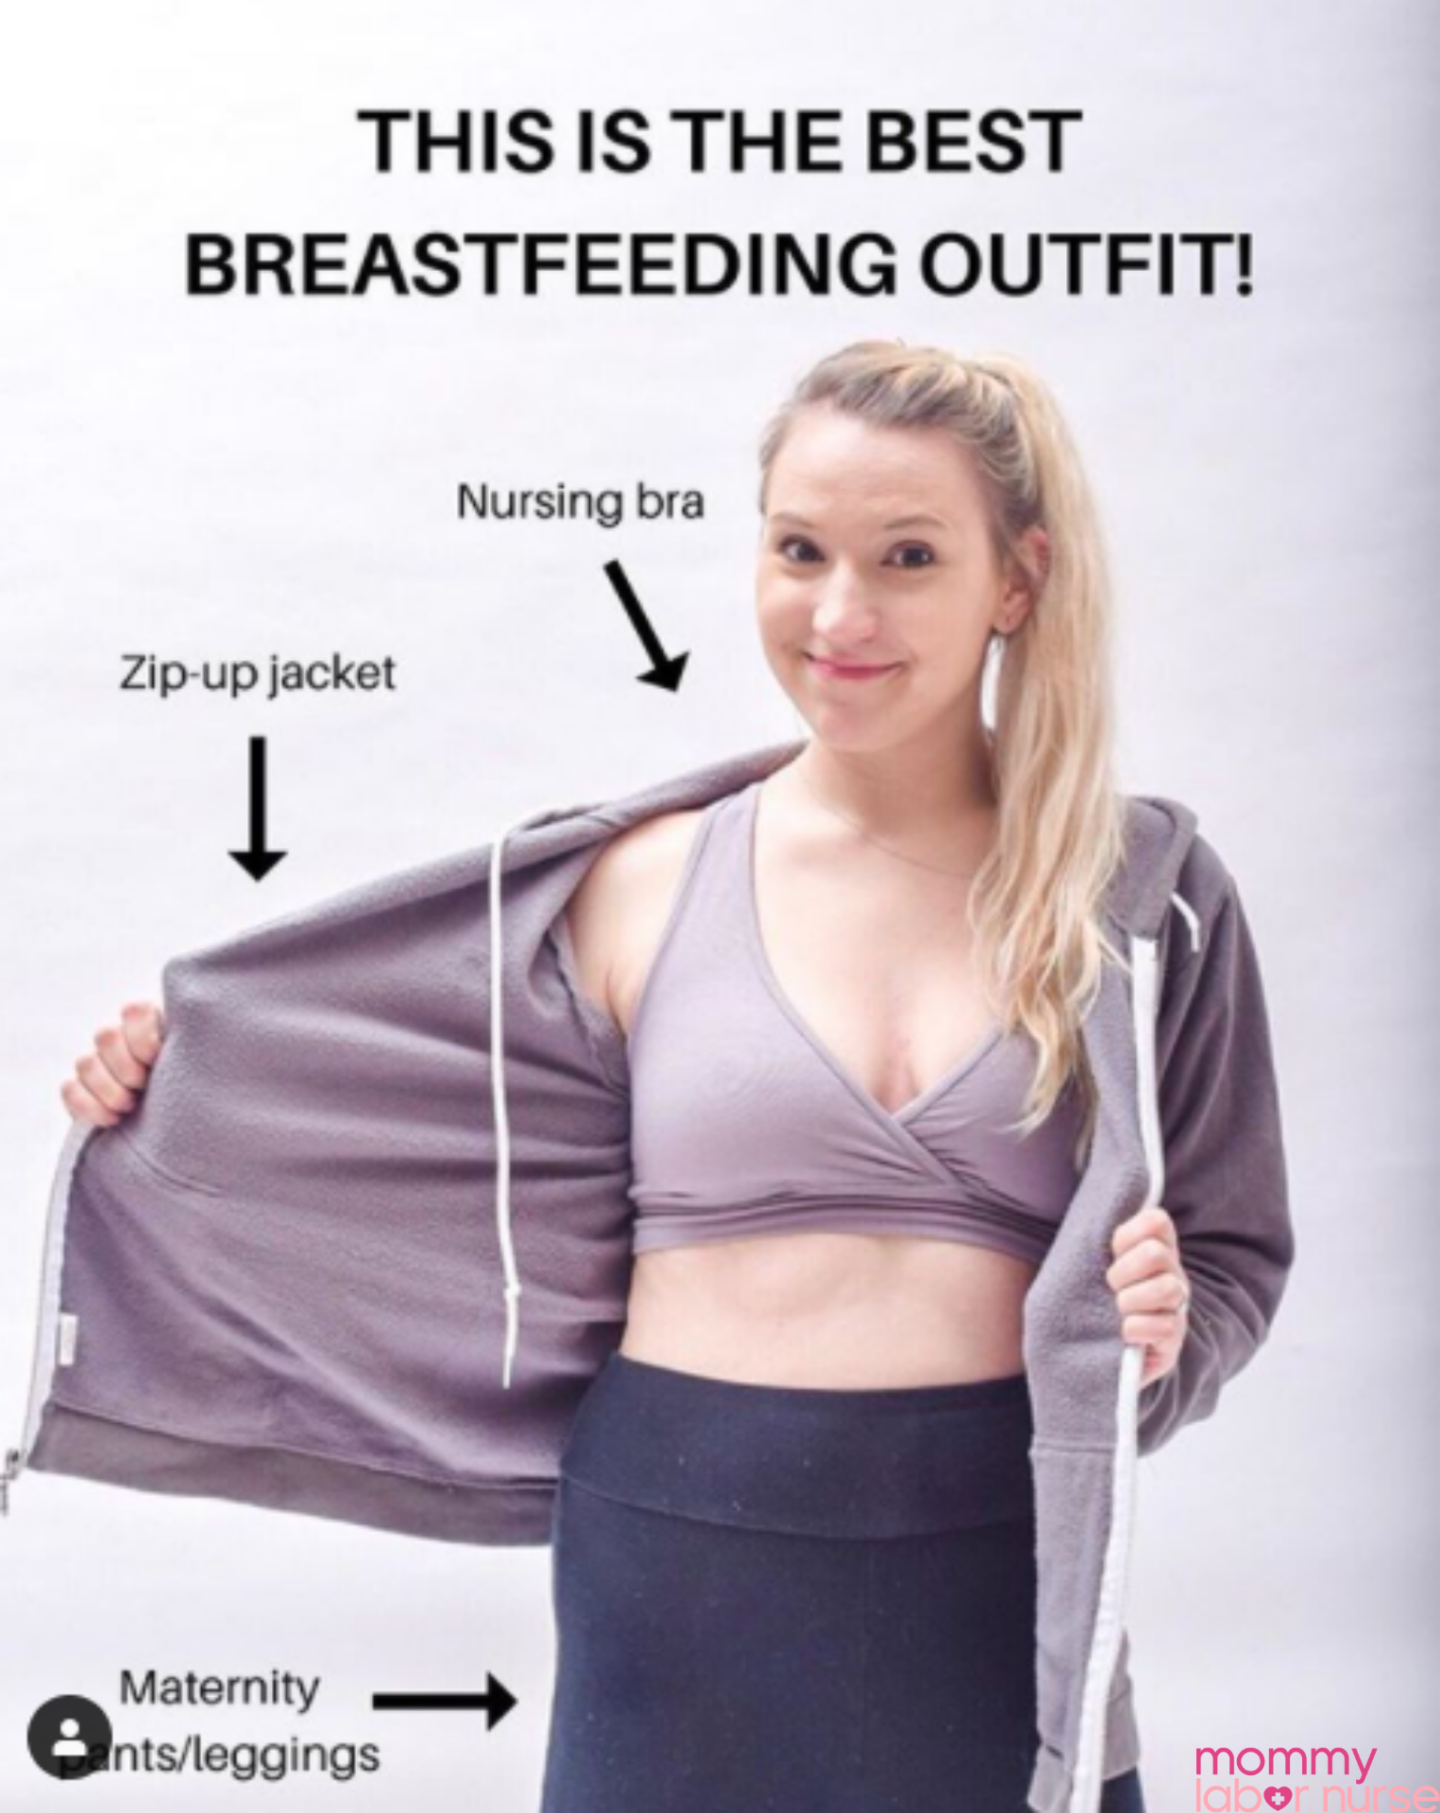 best breastfeeding outfit infographic